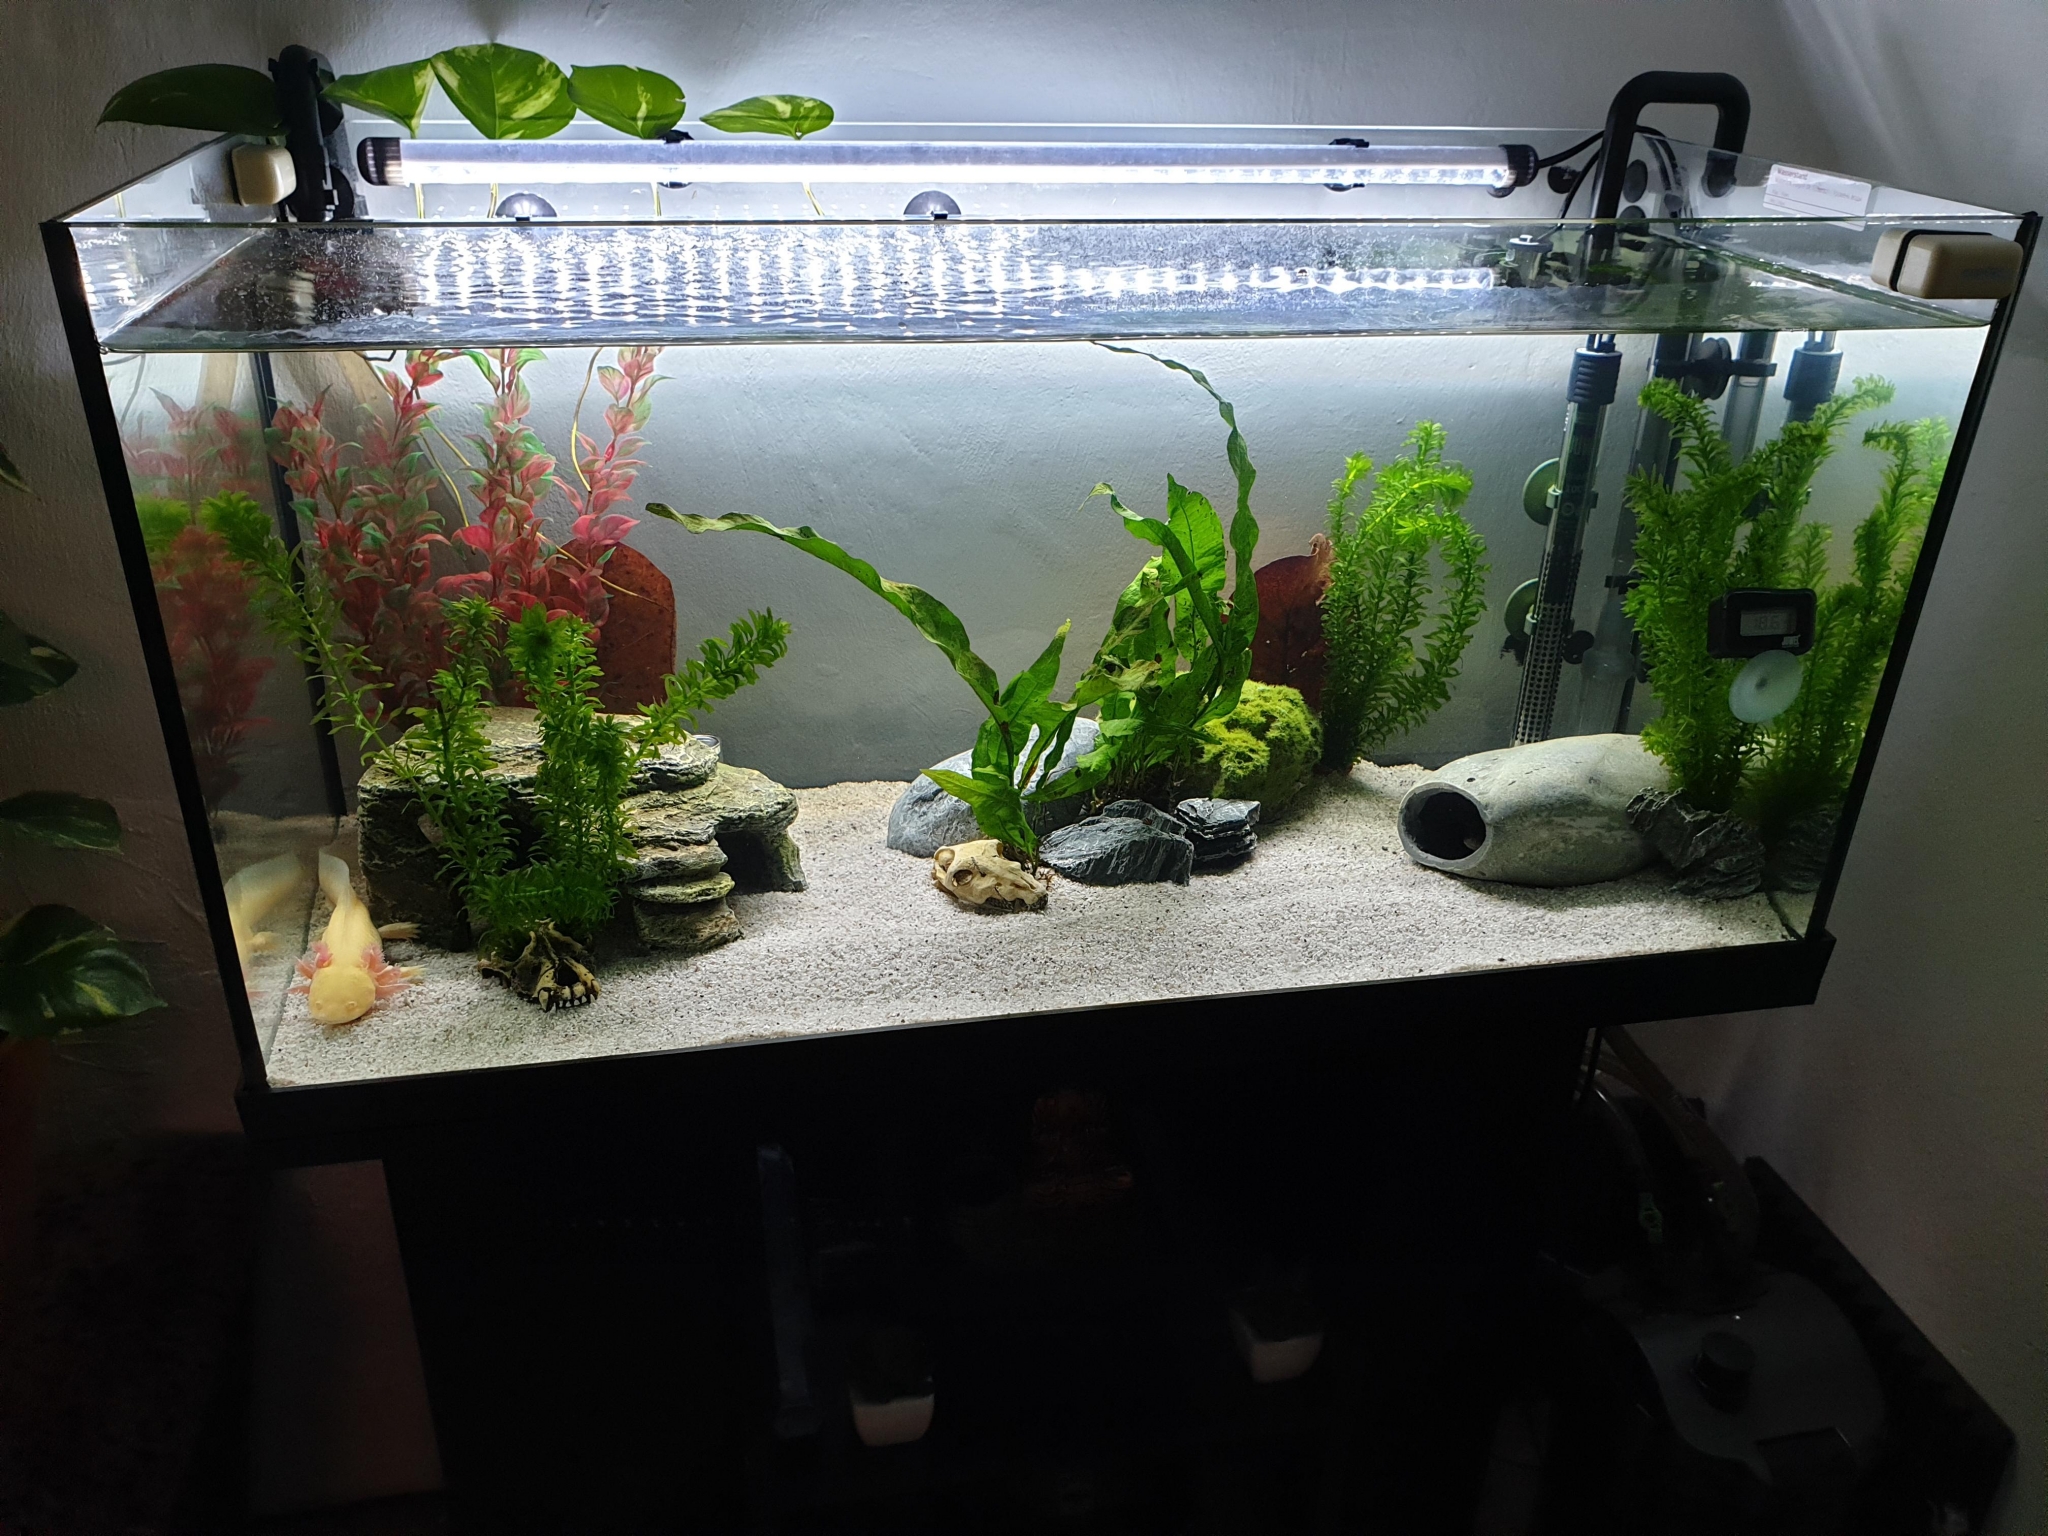 Best Brand Of Fish Tank The best fish tanks of 2020